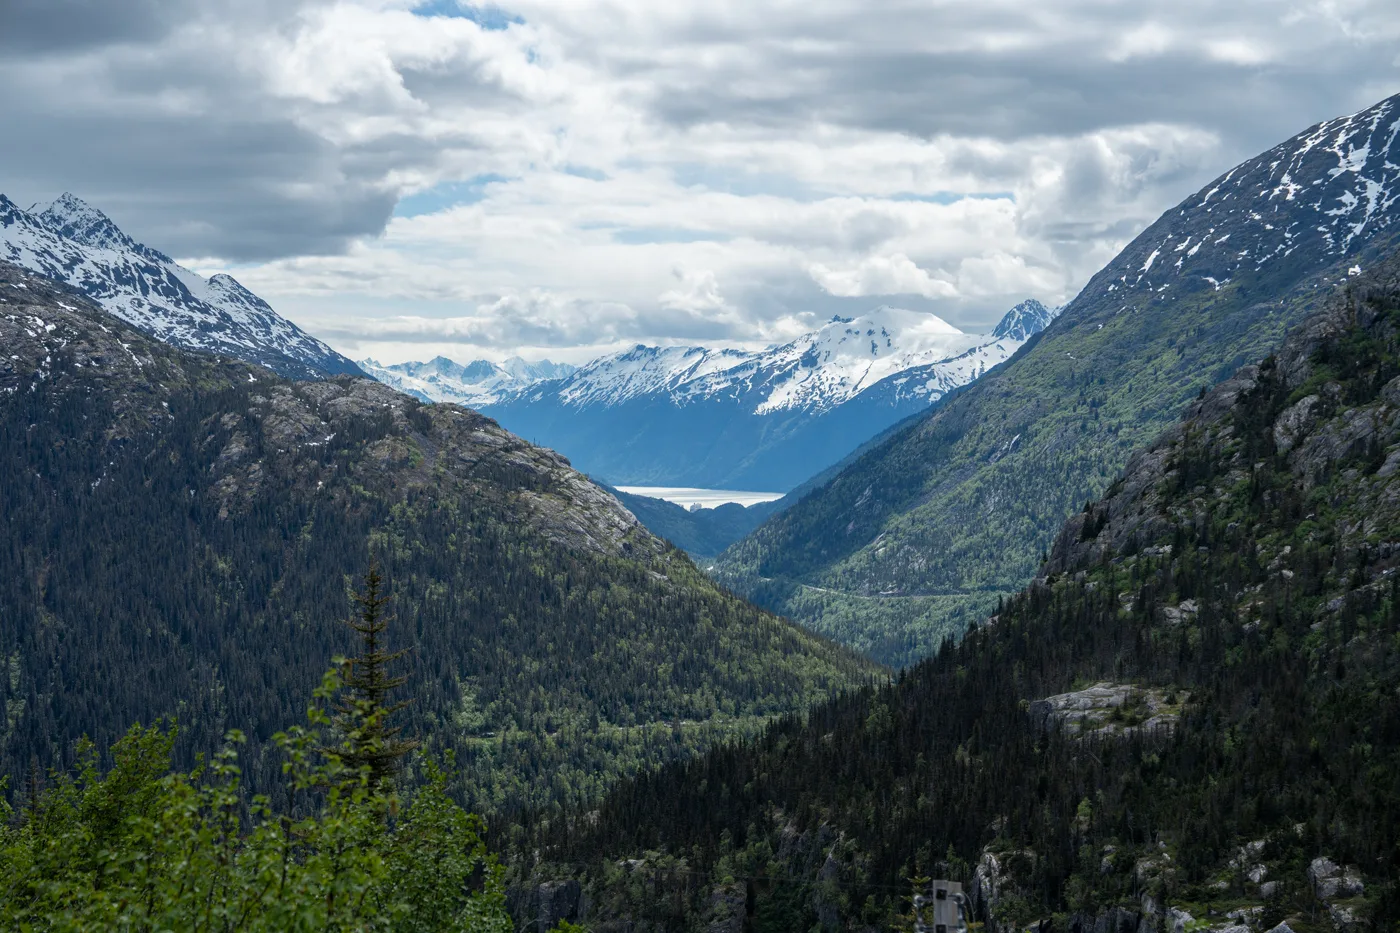 Remarkable views from the White Pass Summit train ride